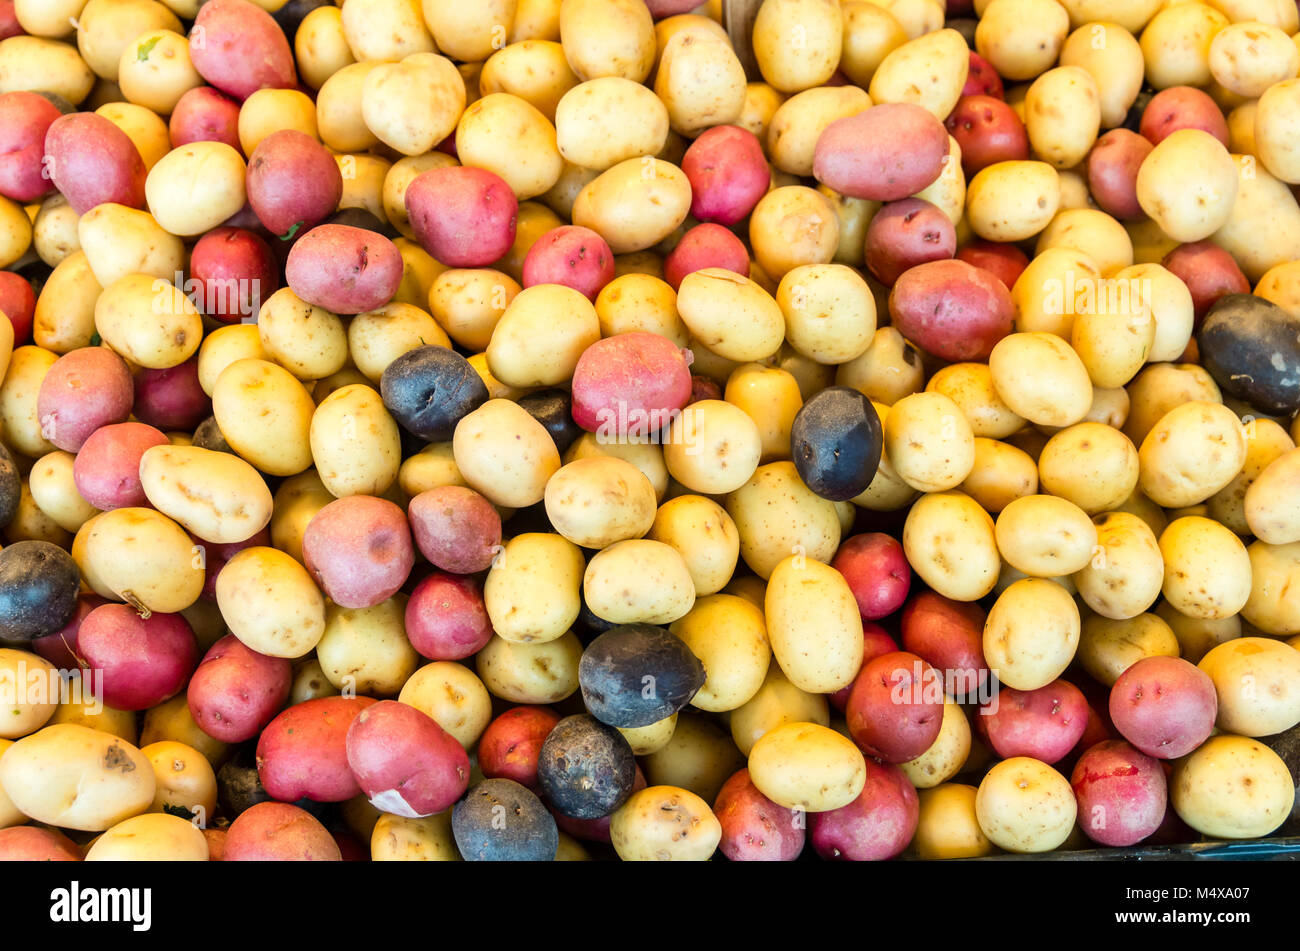 Display of red, white and blue potatoes at a produce market in Pike Place Market.  Seattle, Washington Stock Photo